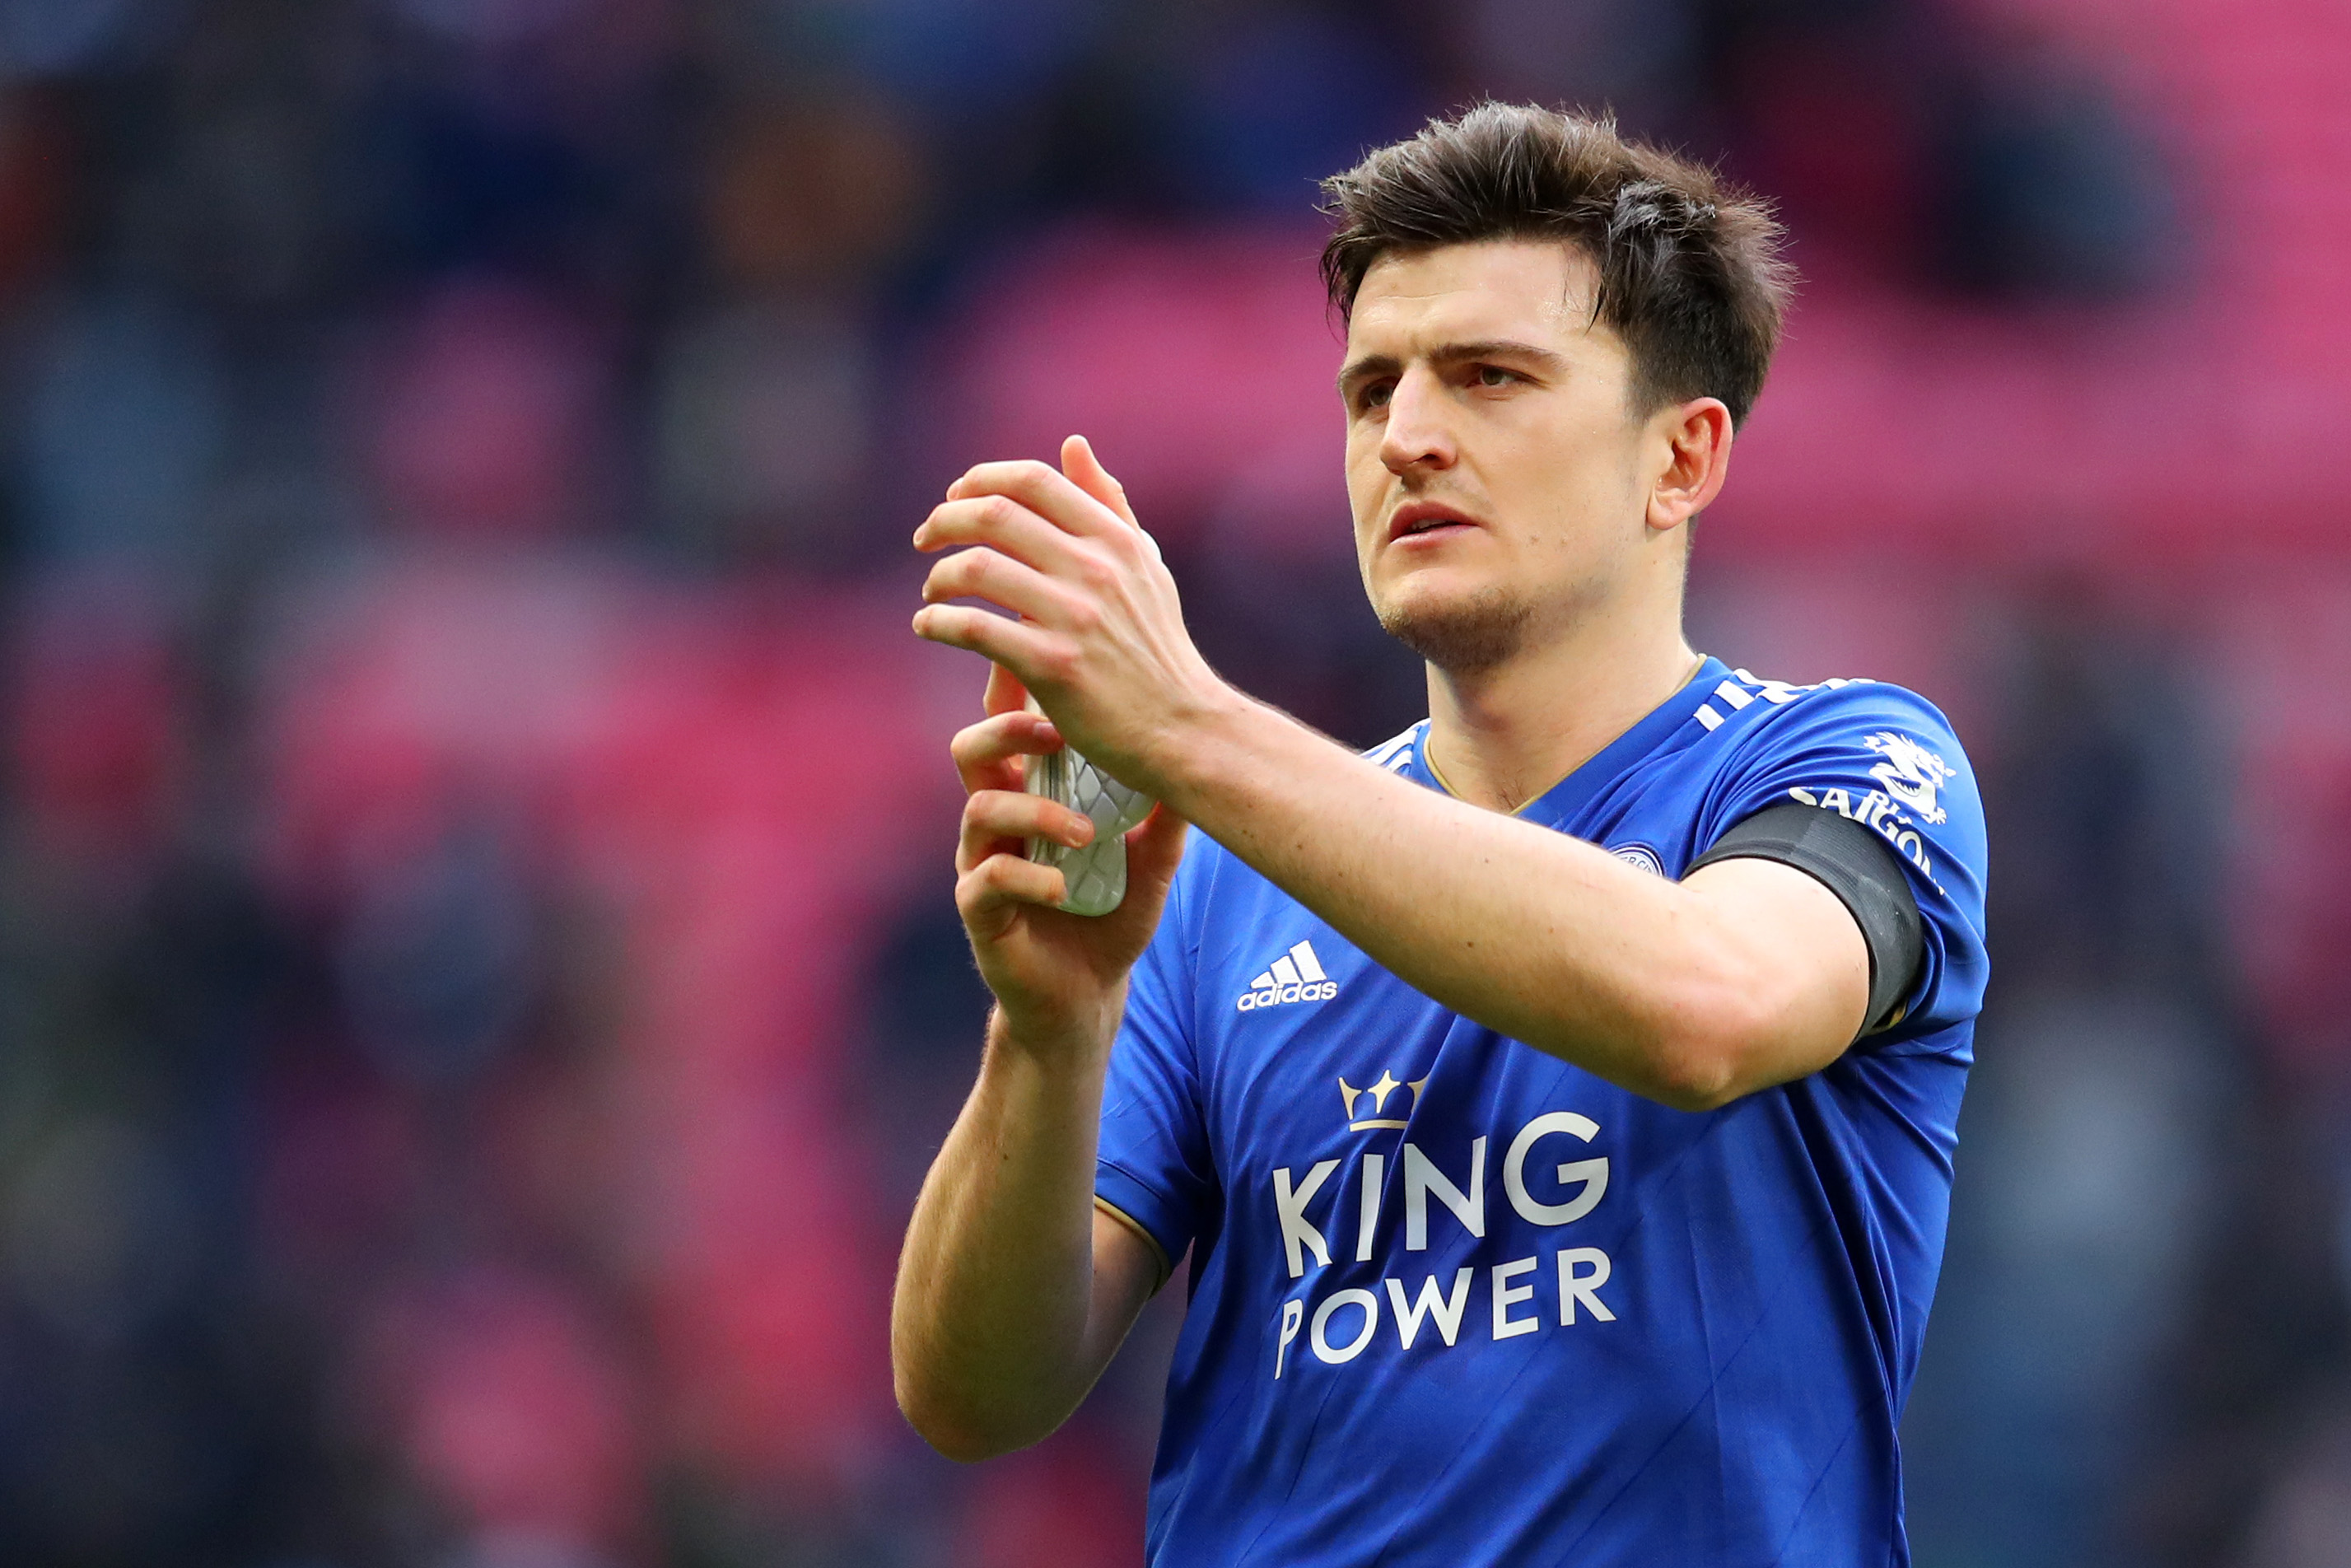 LONDON, ENGLAND - FEBRUARY 10: Harry Maguire of Leicester City acknowledges the fans after the Premier League match between Tottenham Hotspur and Leicester City at Wembley Stadium on February 10, 2019 in London, United Kingdom.  (Photo by Catherine Ivill/Getty Images)